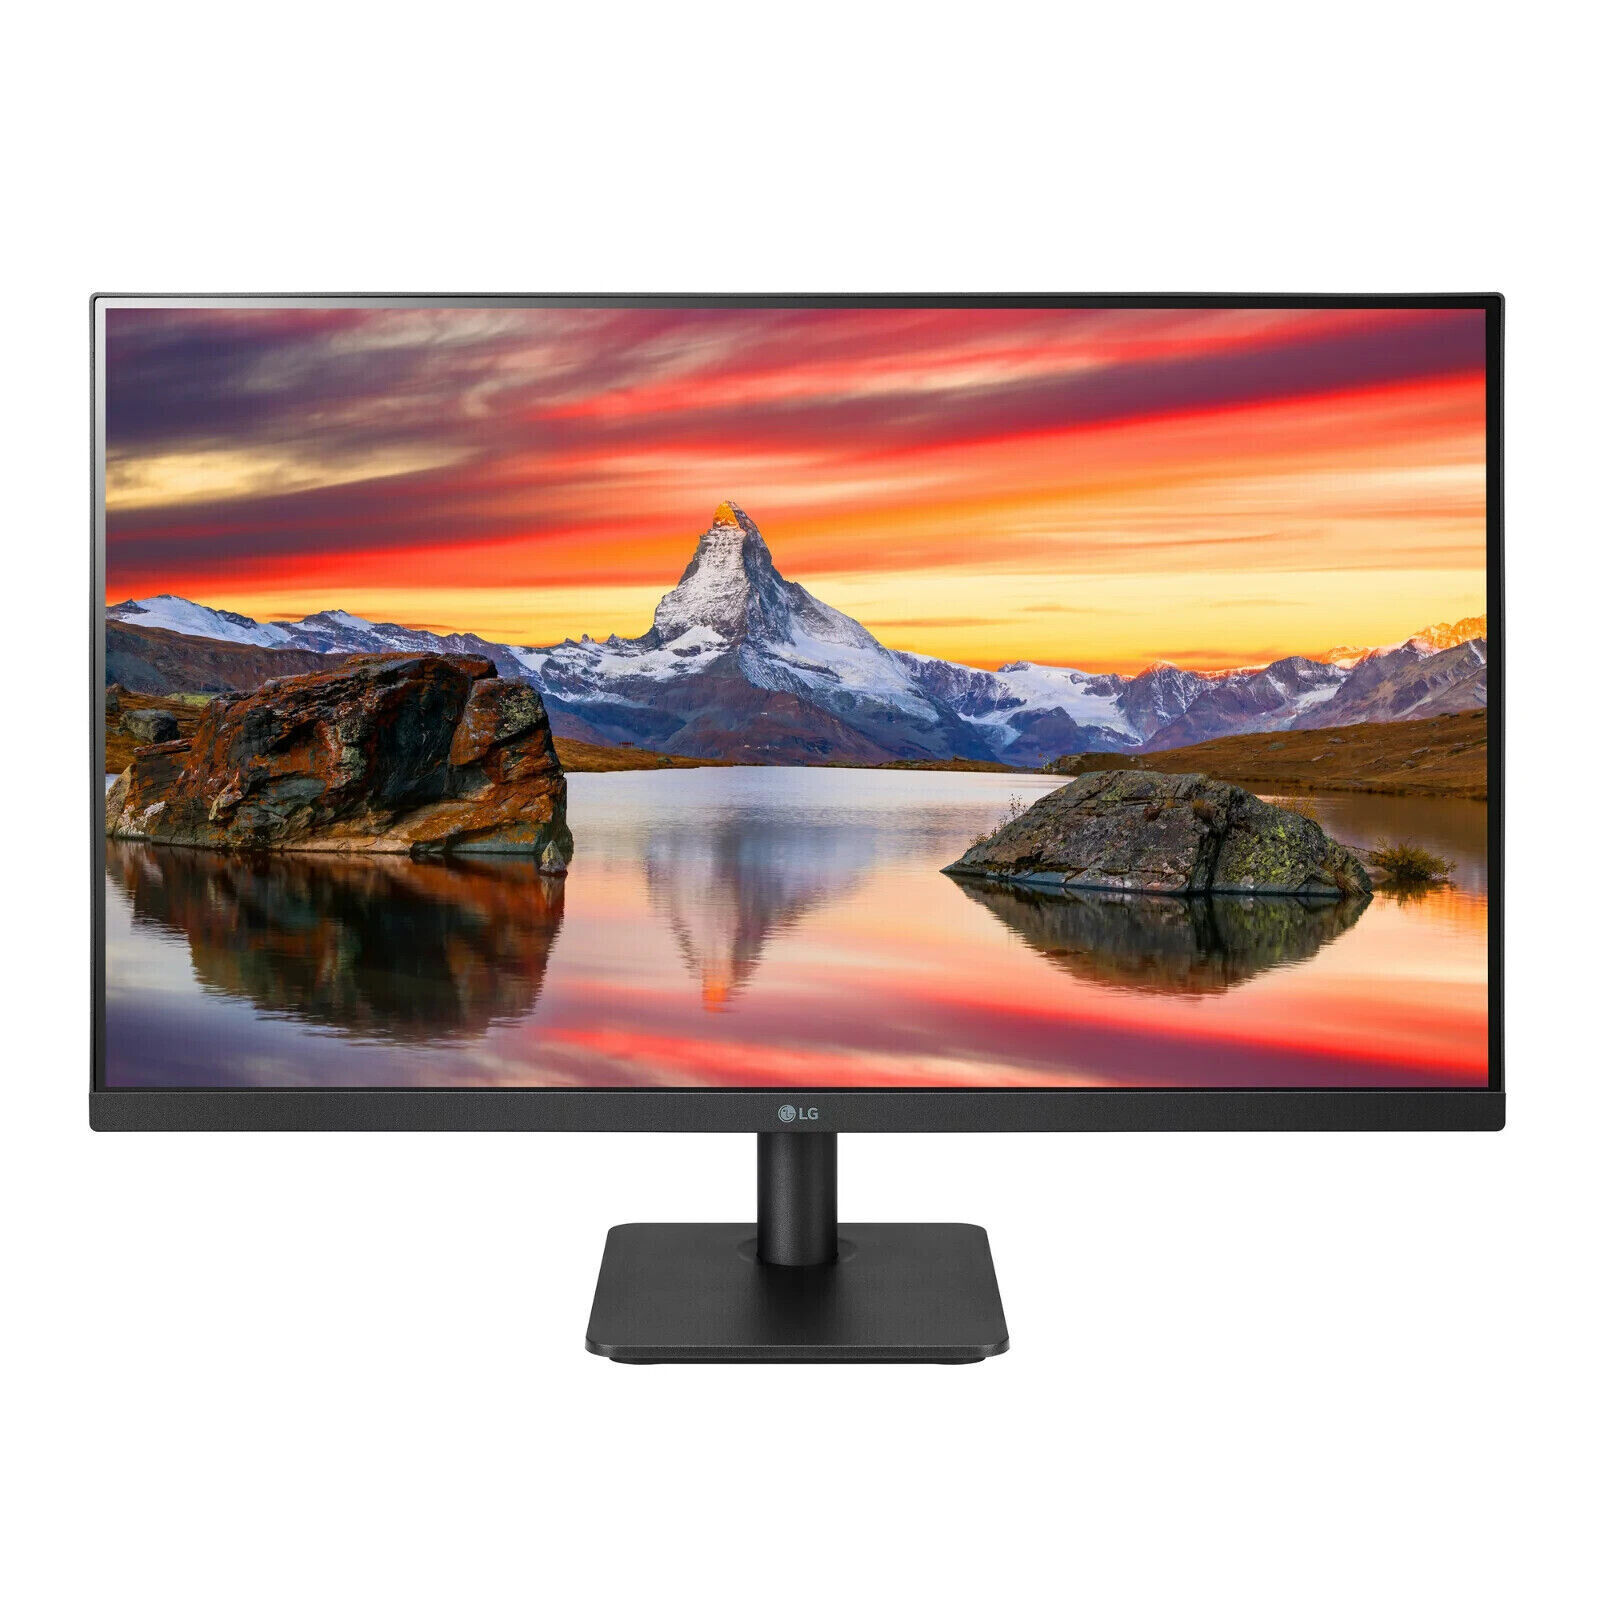 Primary image for LG 27MP40W 27" Widescreen IPS LCD Monitor Full HD 1080P Anti-Glare/AMD FreeSync